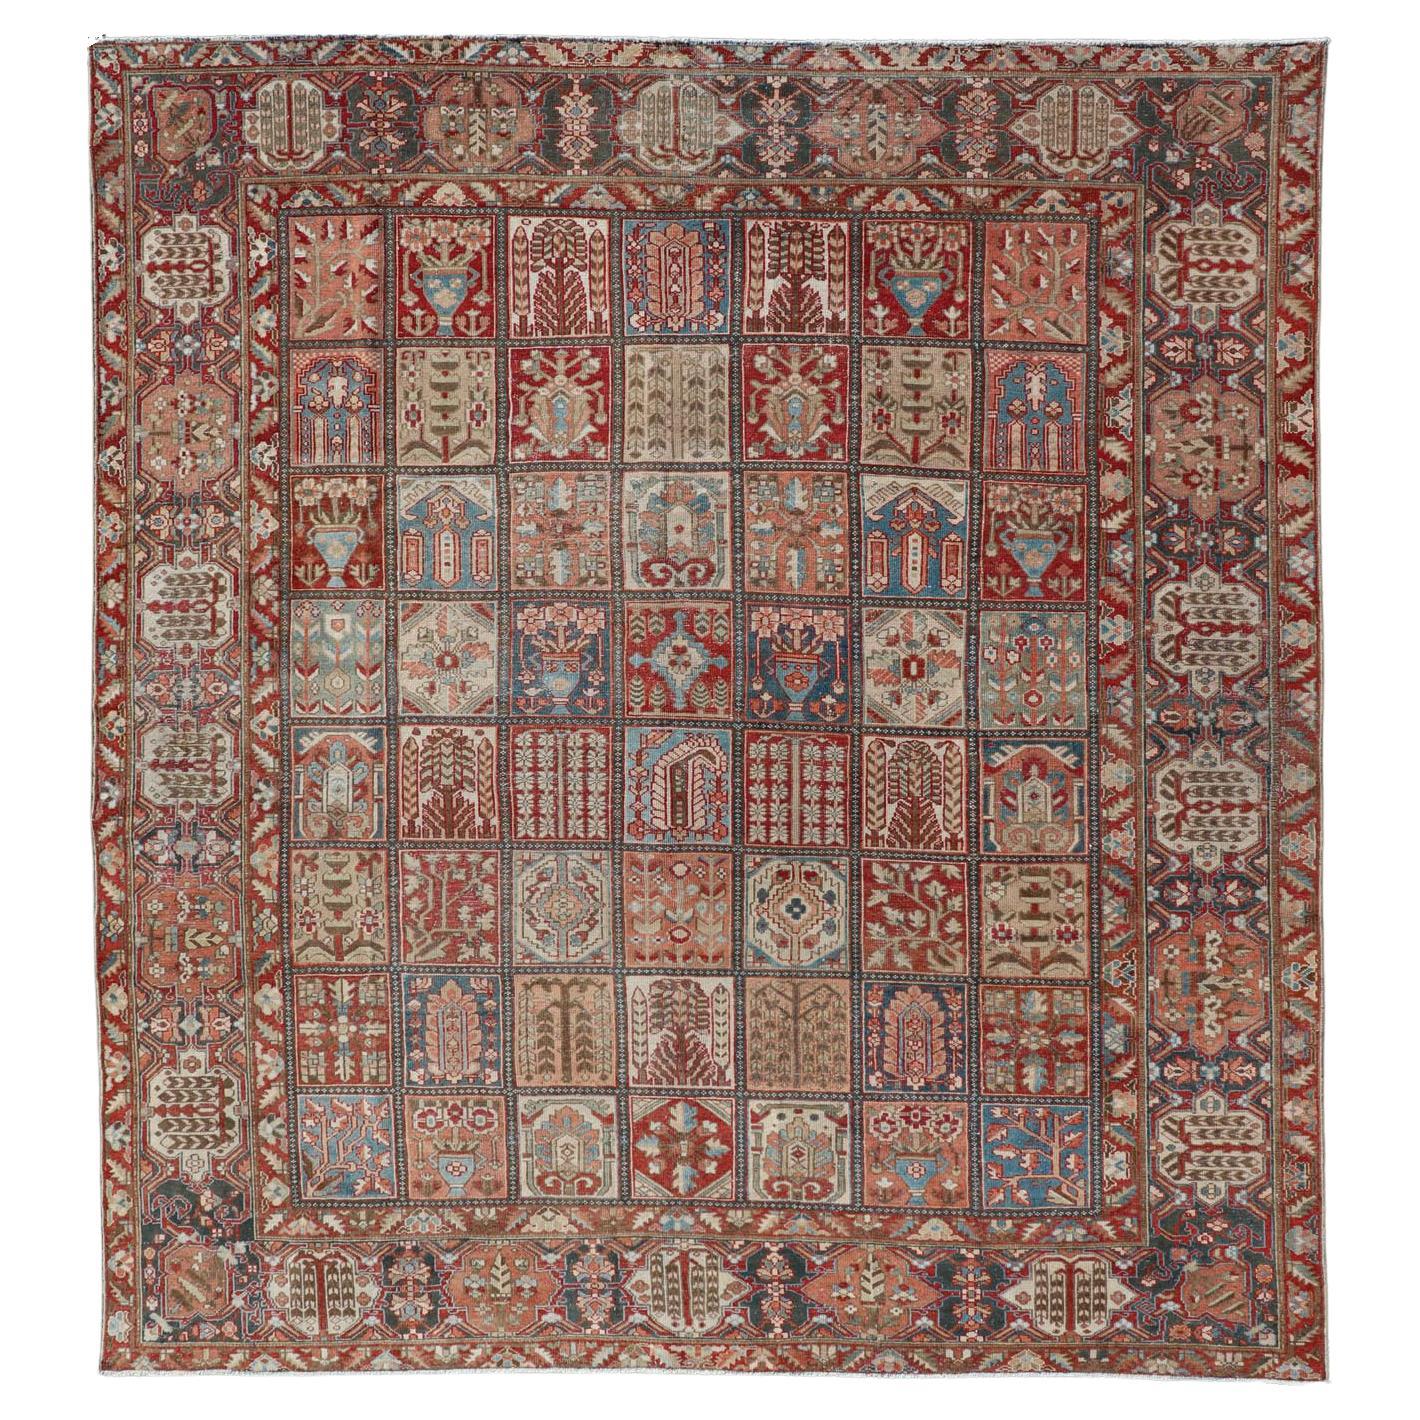 Square Persian Large Bakhtiari Rug with All-Over Garden Design in Muted Colors For Sale